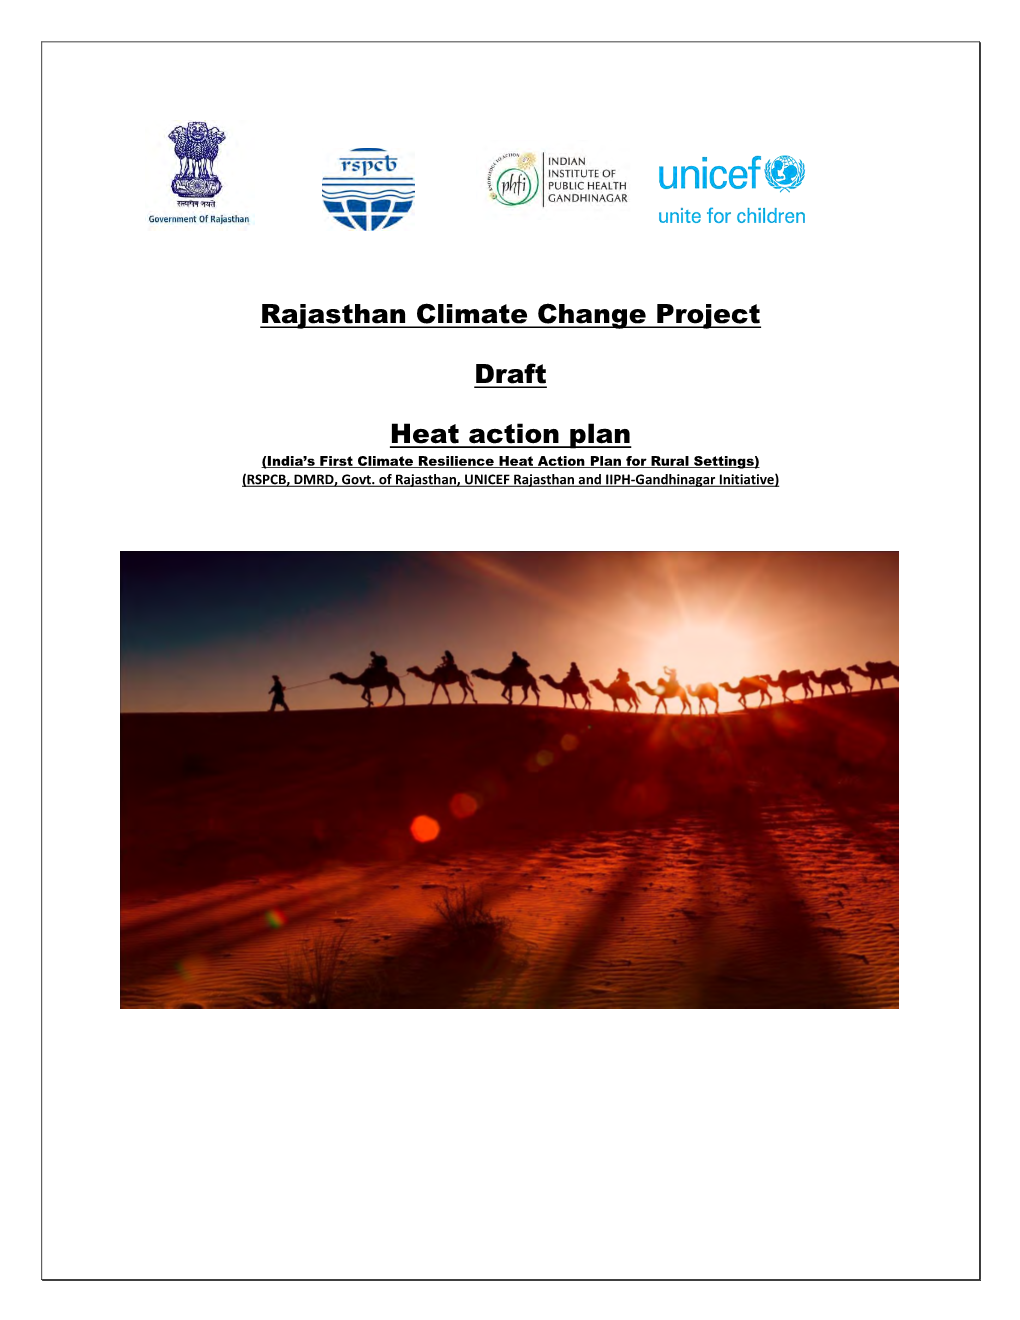 India's First Climate Resilience Heat Action Plan for Rural Settings